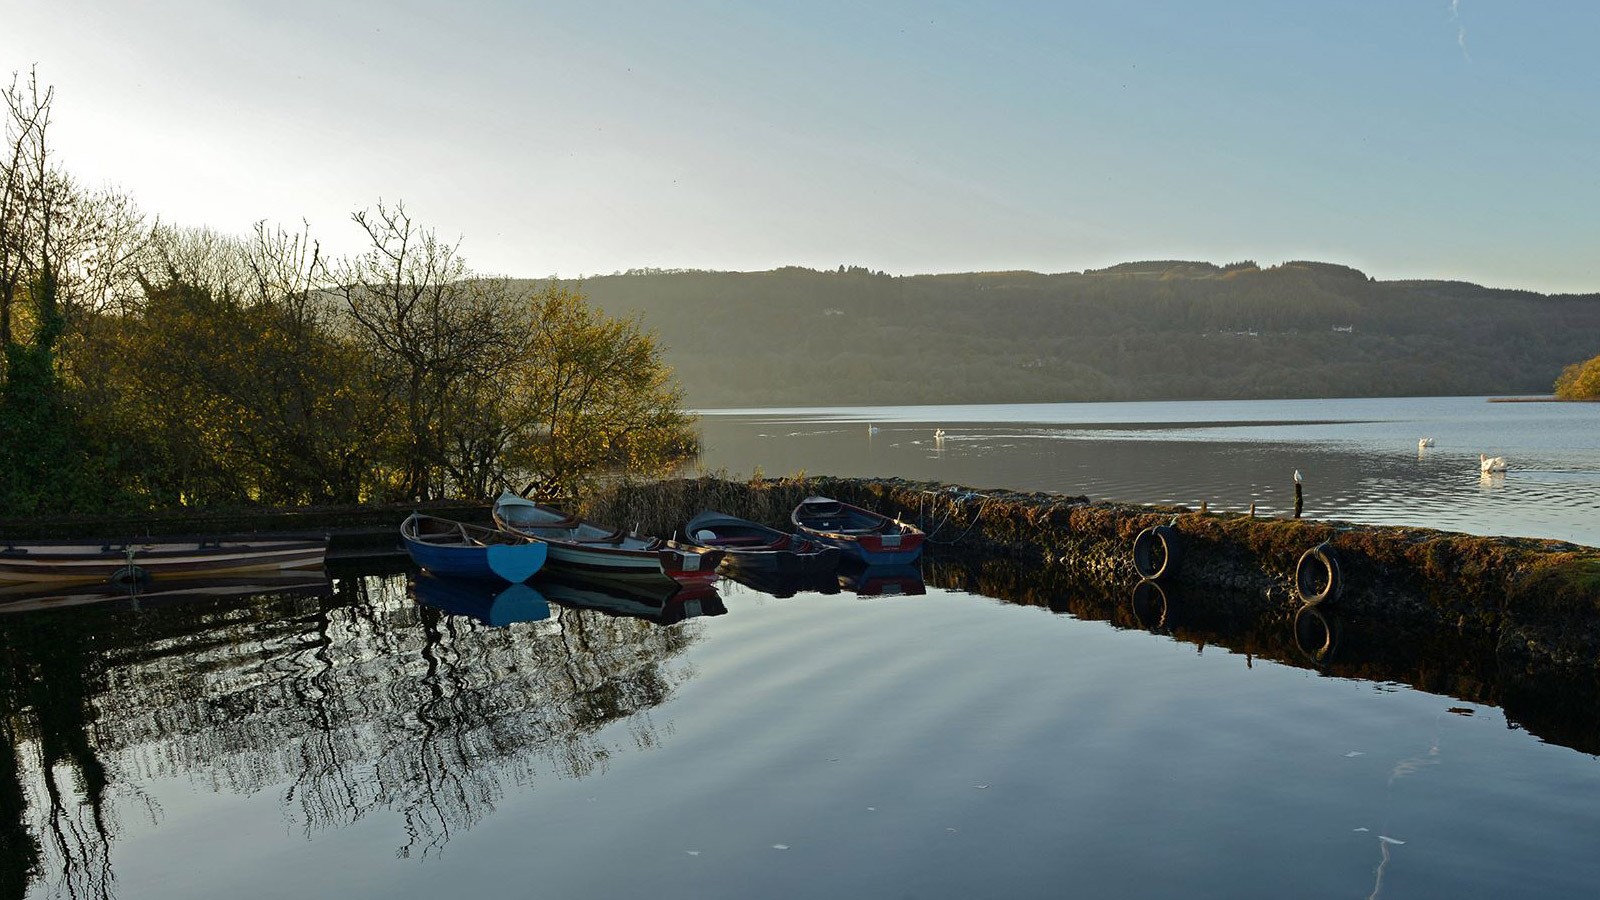 Fishing boats moored on Inchiquin Lough, rural, adventure